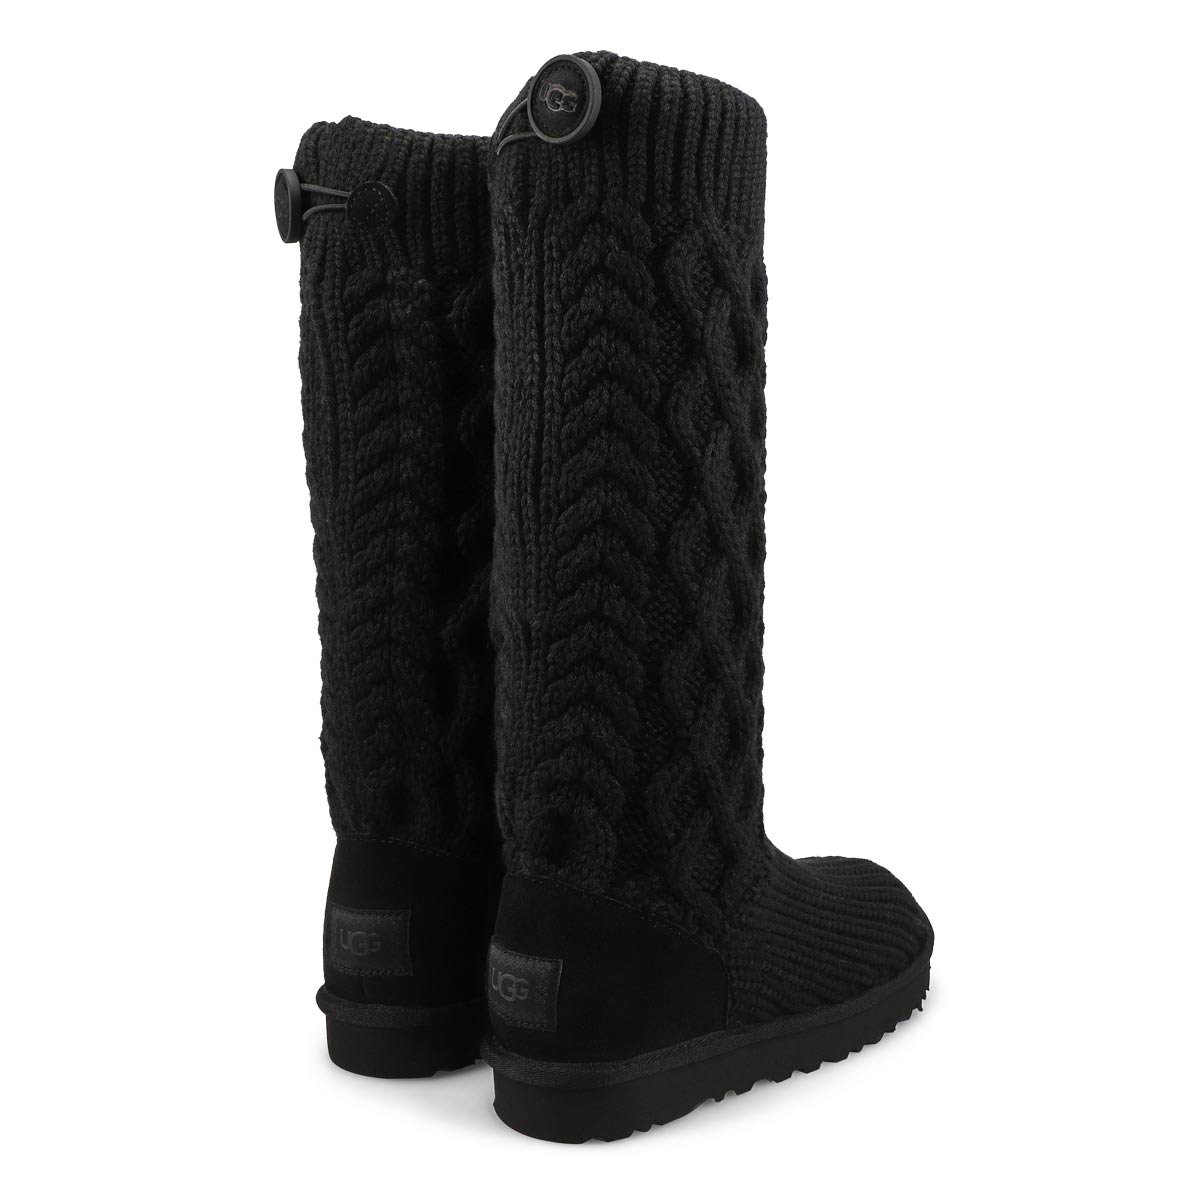 UGG Women's Classic Cardi Cabled Knit Boot - | SoftMoc.com